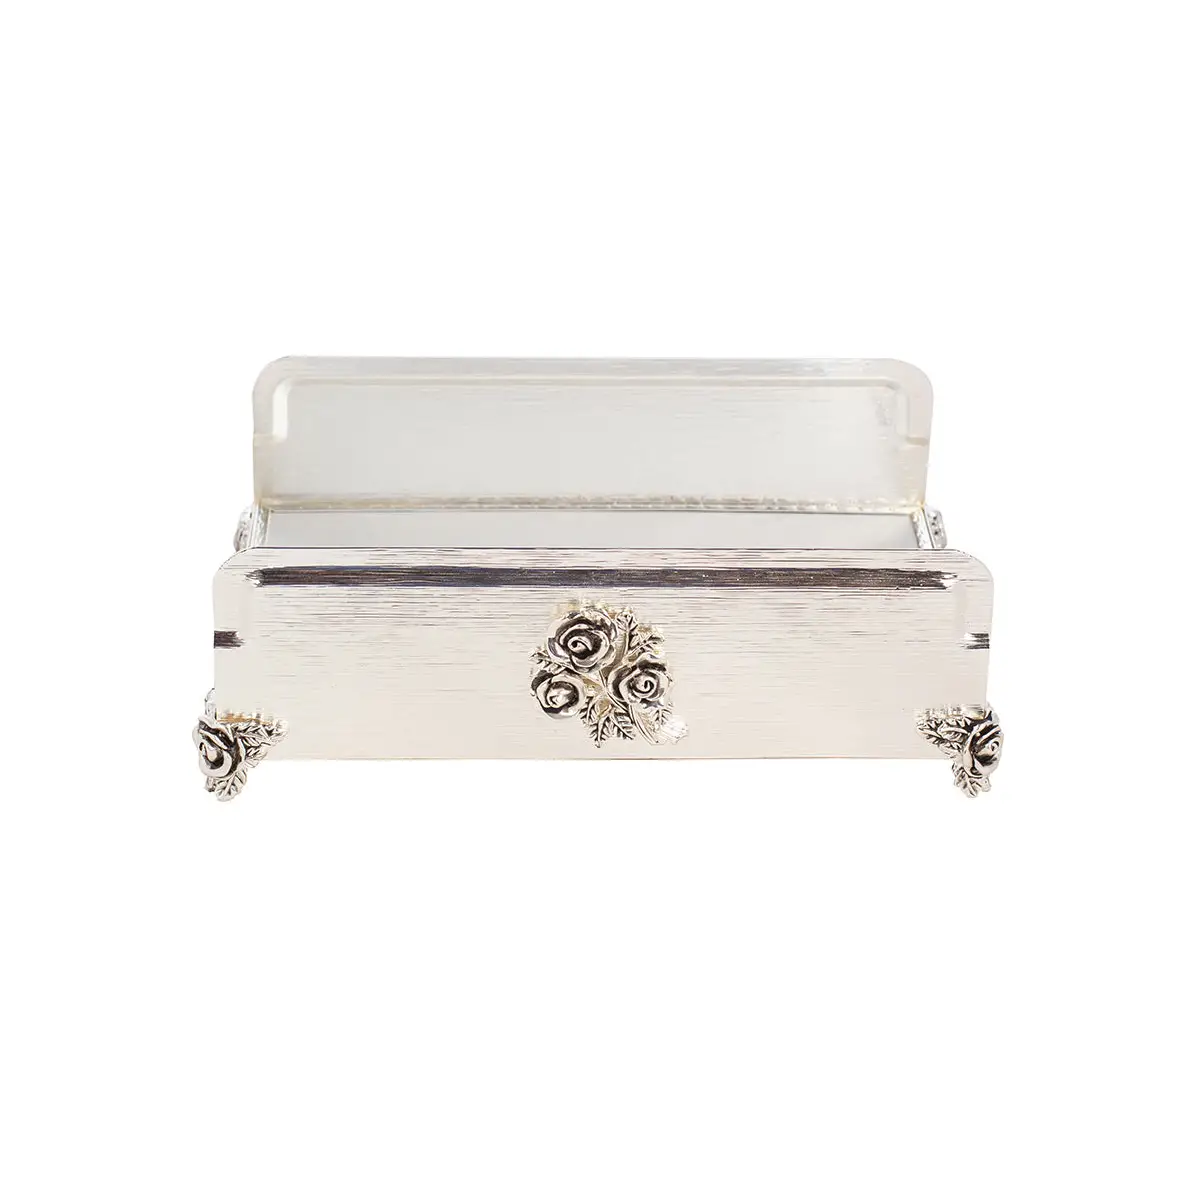 SILVER PLATED TOWEL HOLDER - ROSE COLLECTION